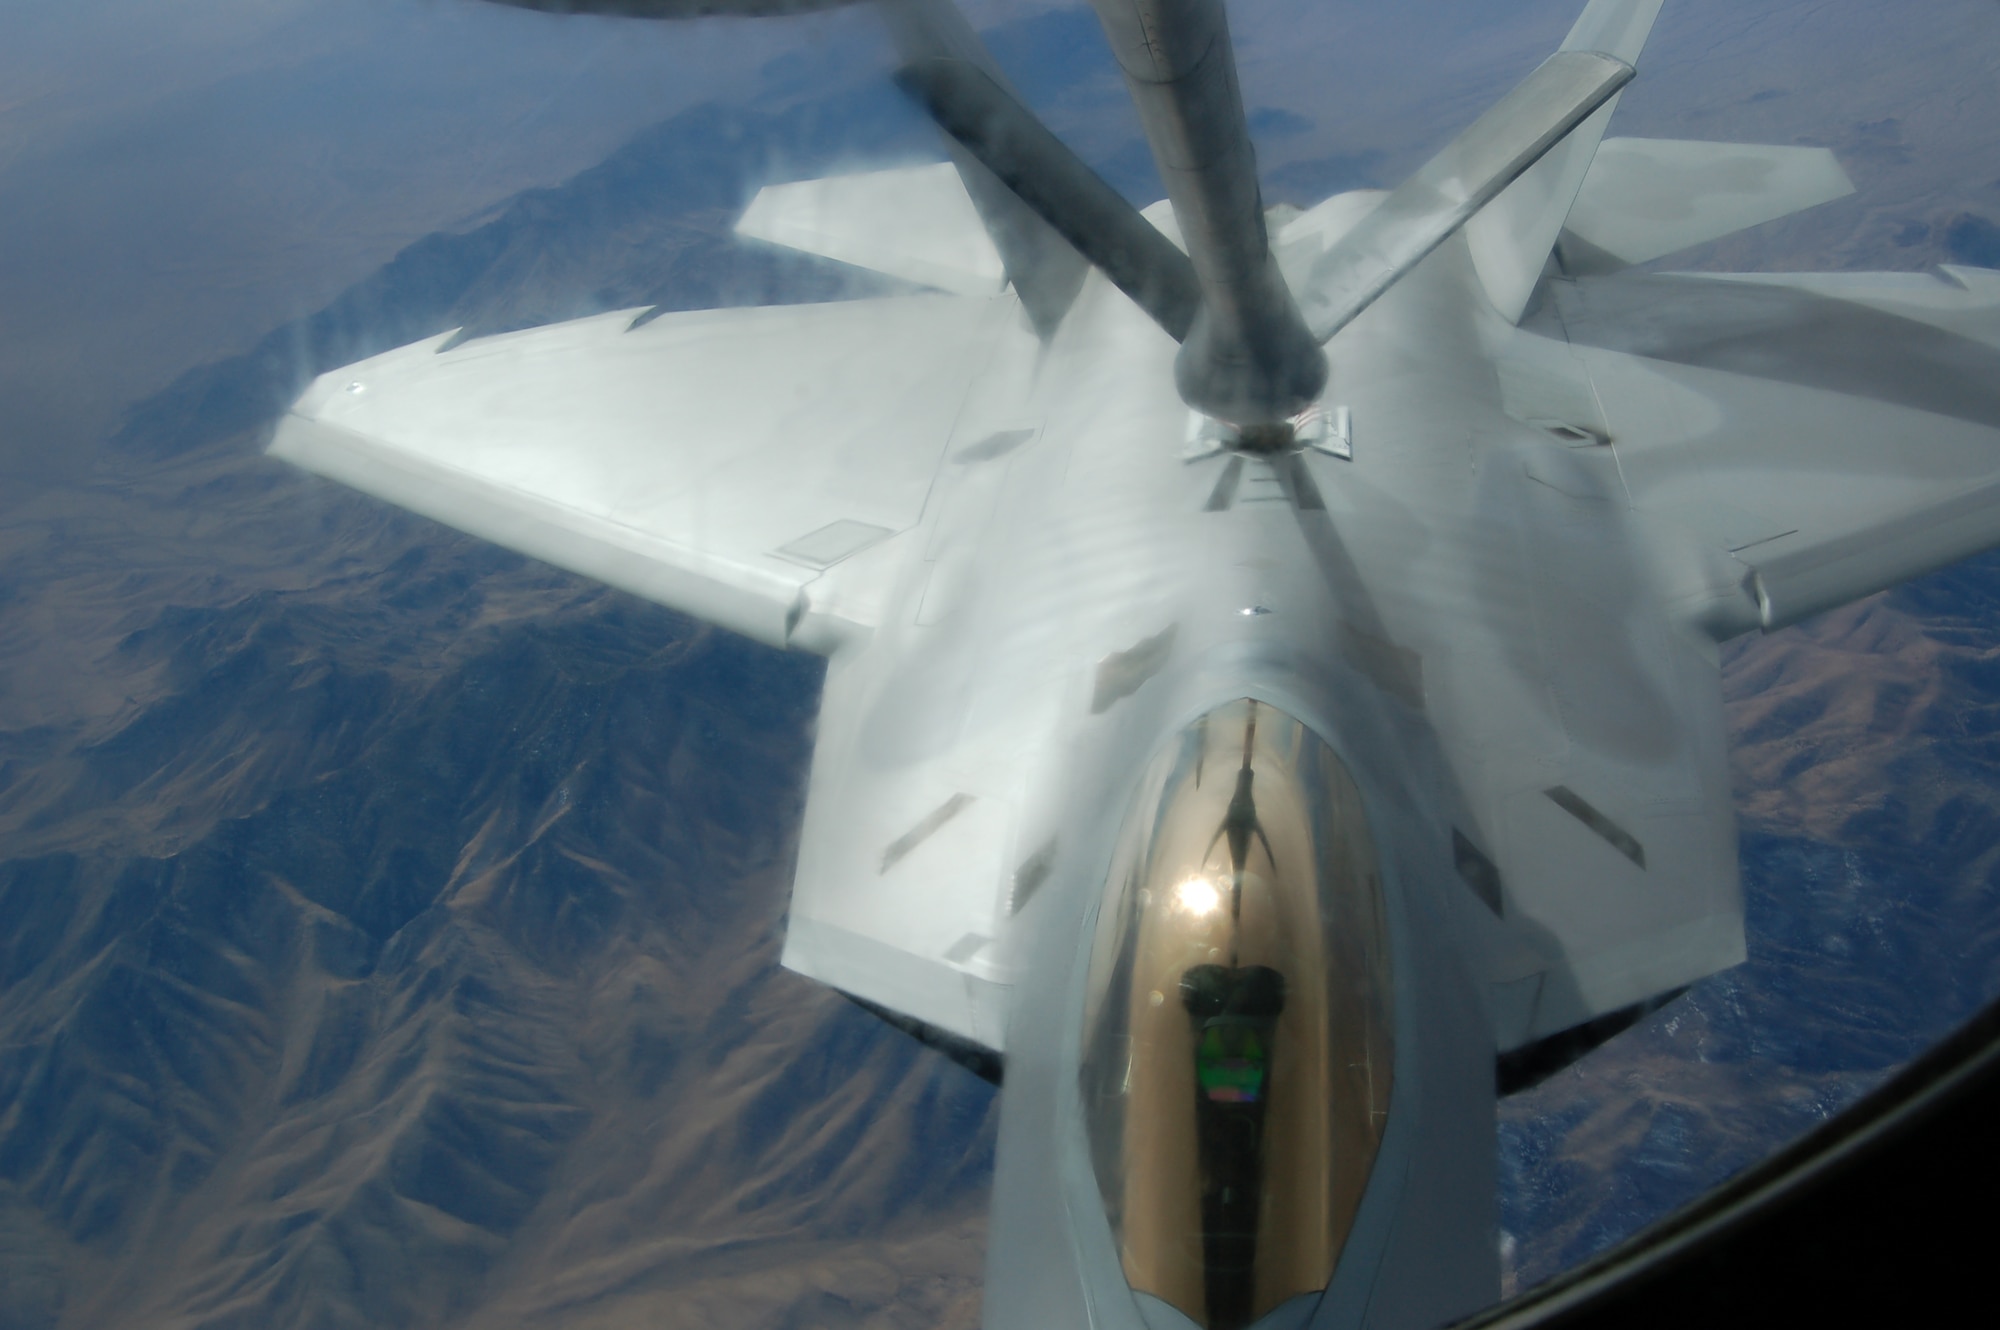 An F-22 Raptor from the 1st Fighter Wing at Langley Air Force Base, Va., tops off from a KC-135 Stratotanker Feb. 7 during the Red Flag Exercise at Nellis AFB, Nev. Two KC-135s from the 319th Air Refueling Wing at Grand Forks Air Force Base, N.D., make up the lead tanker unit during the exercise. (U.S. Air Force photo/1st Lt. Randi Norton)